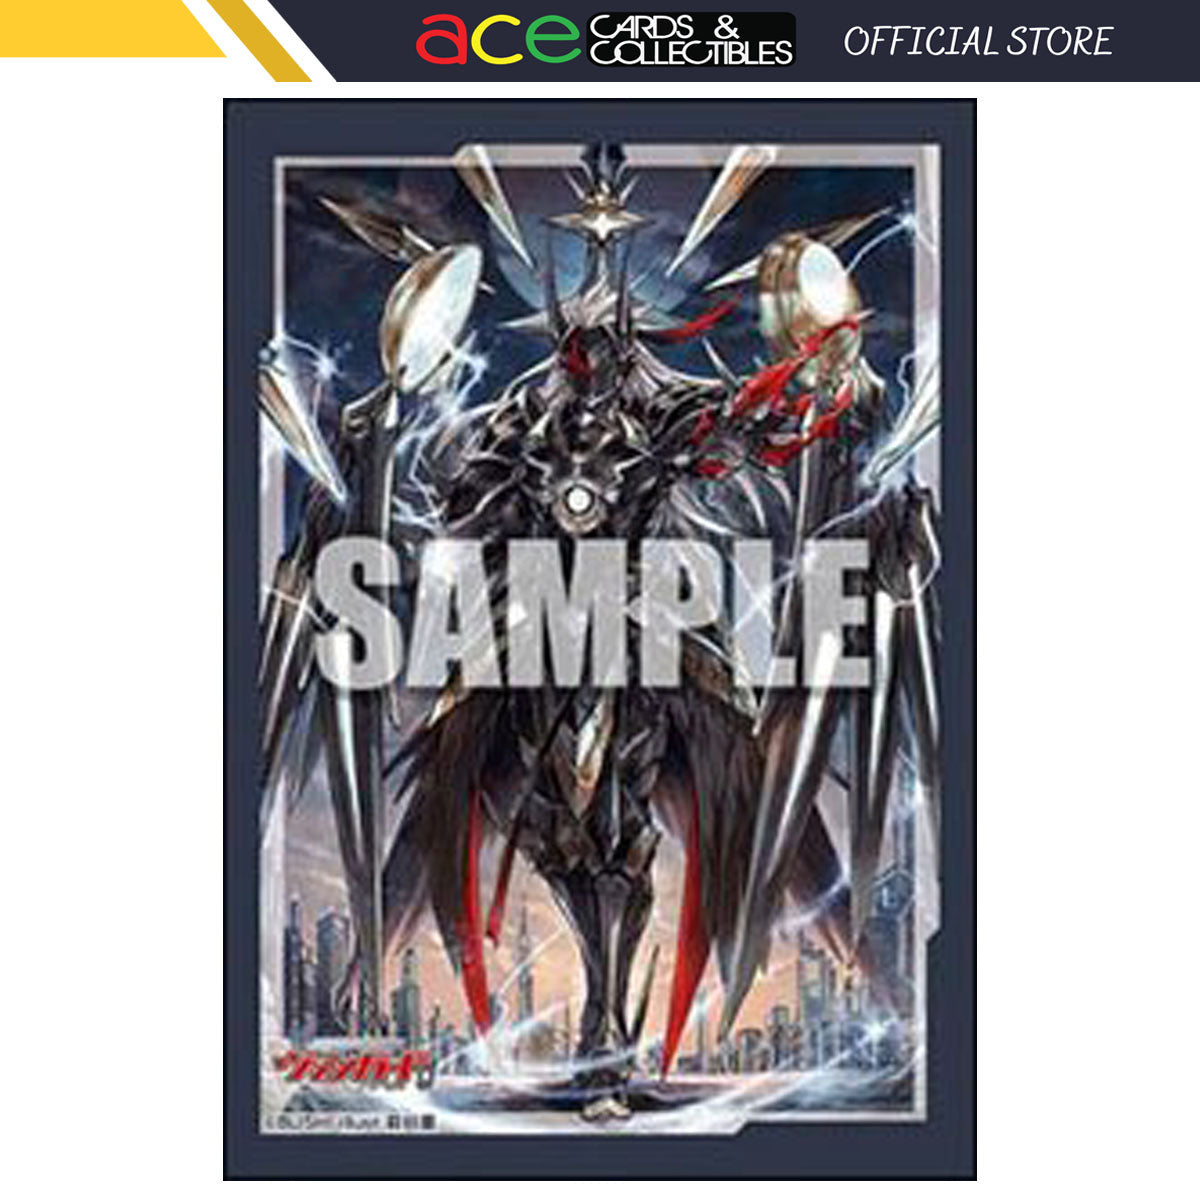 CardFight Vanguard OverDress Sleeve Collection Mini Vol. 602 "Youthberk, 'Broken Sky Arms'"-Bushiroad-Ace Cards & Collectibles